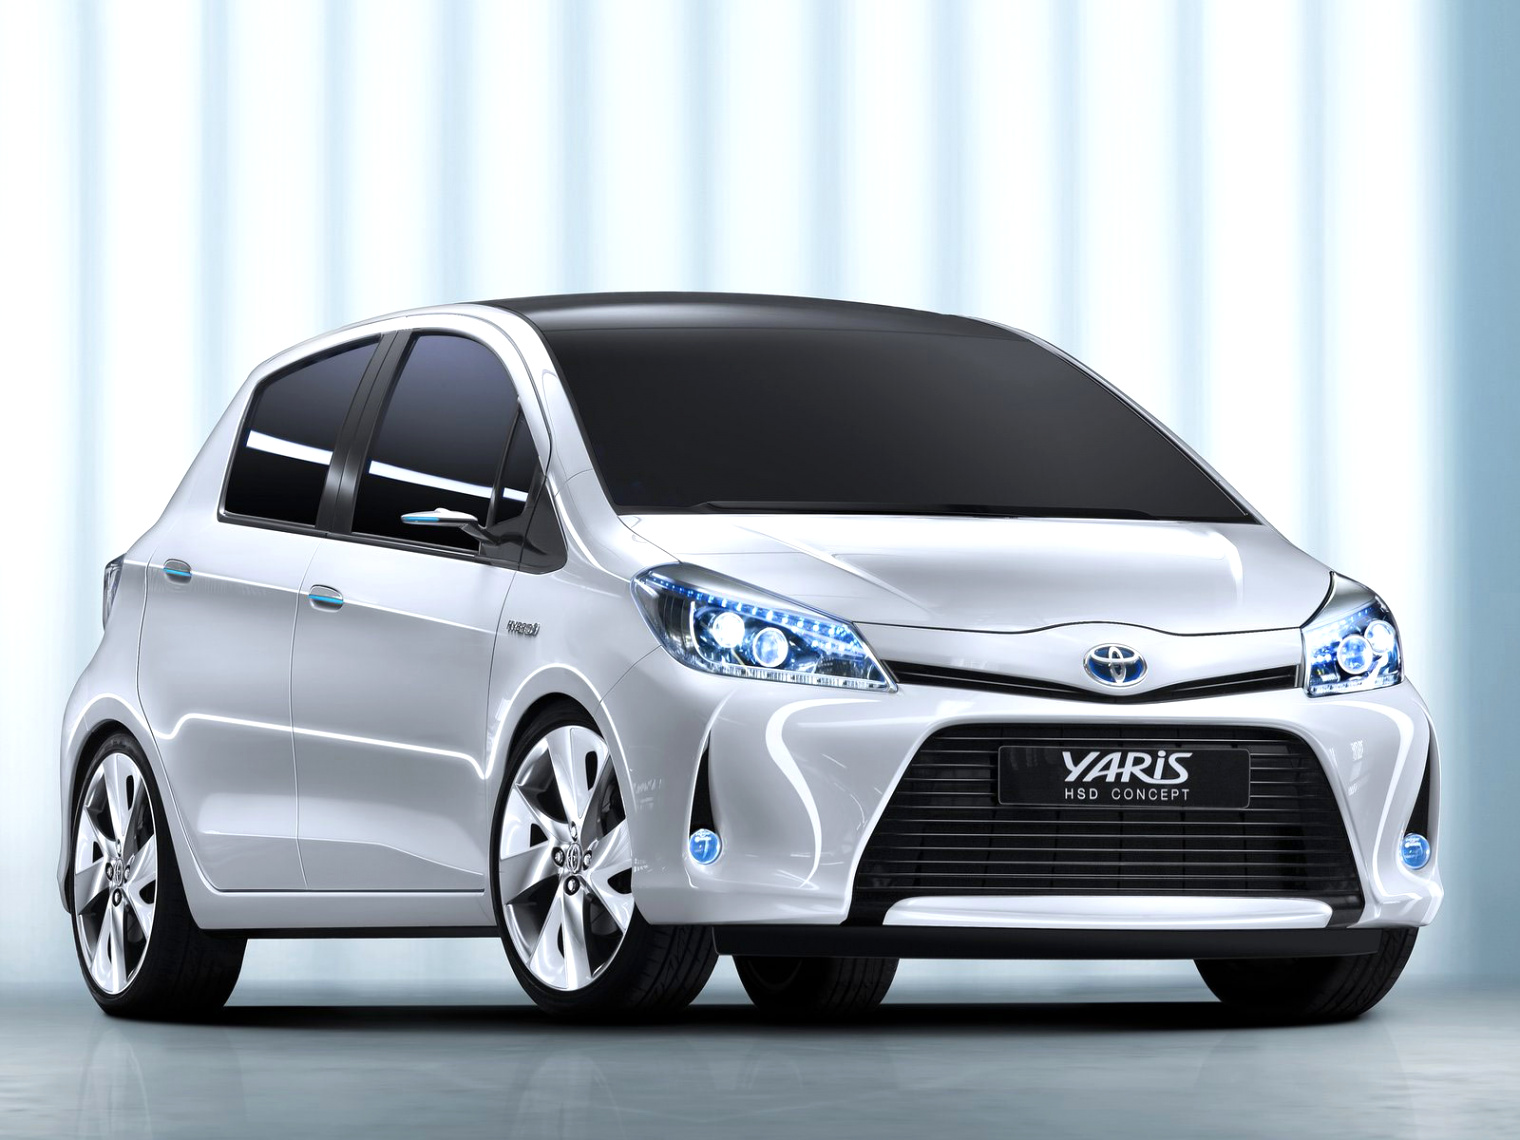 Car Accident Lawyer In Bronx Dans toyota Yaris Hsd Concept Photos 2011 Car Accident Lawyer